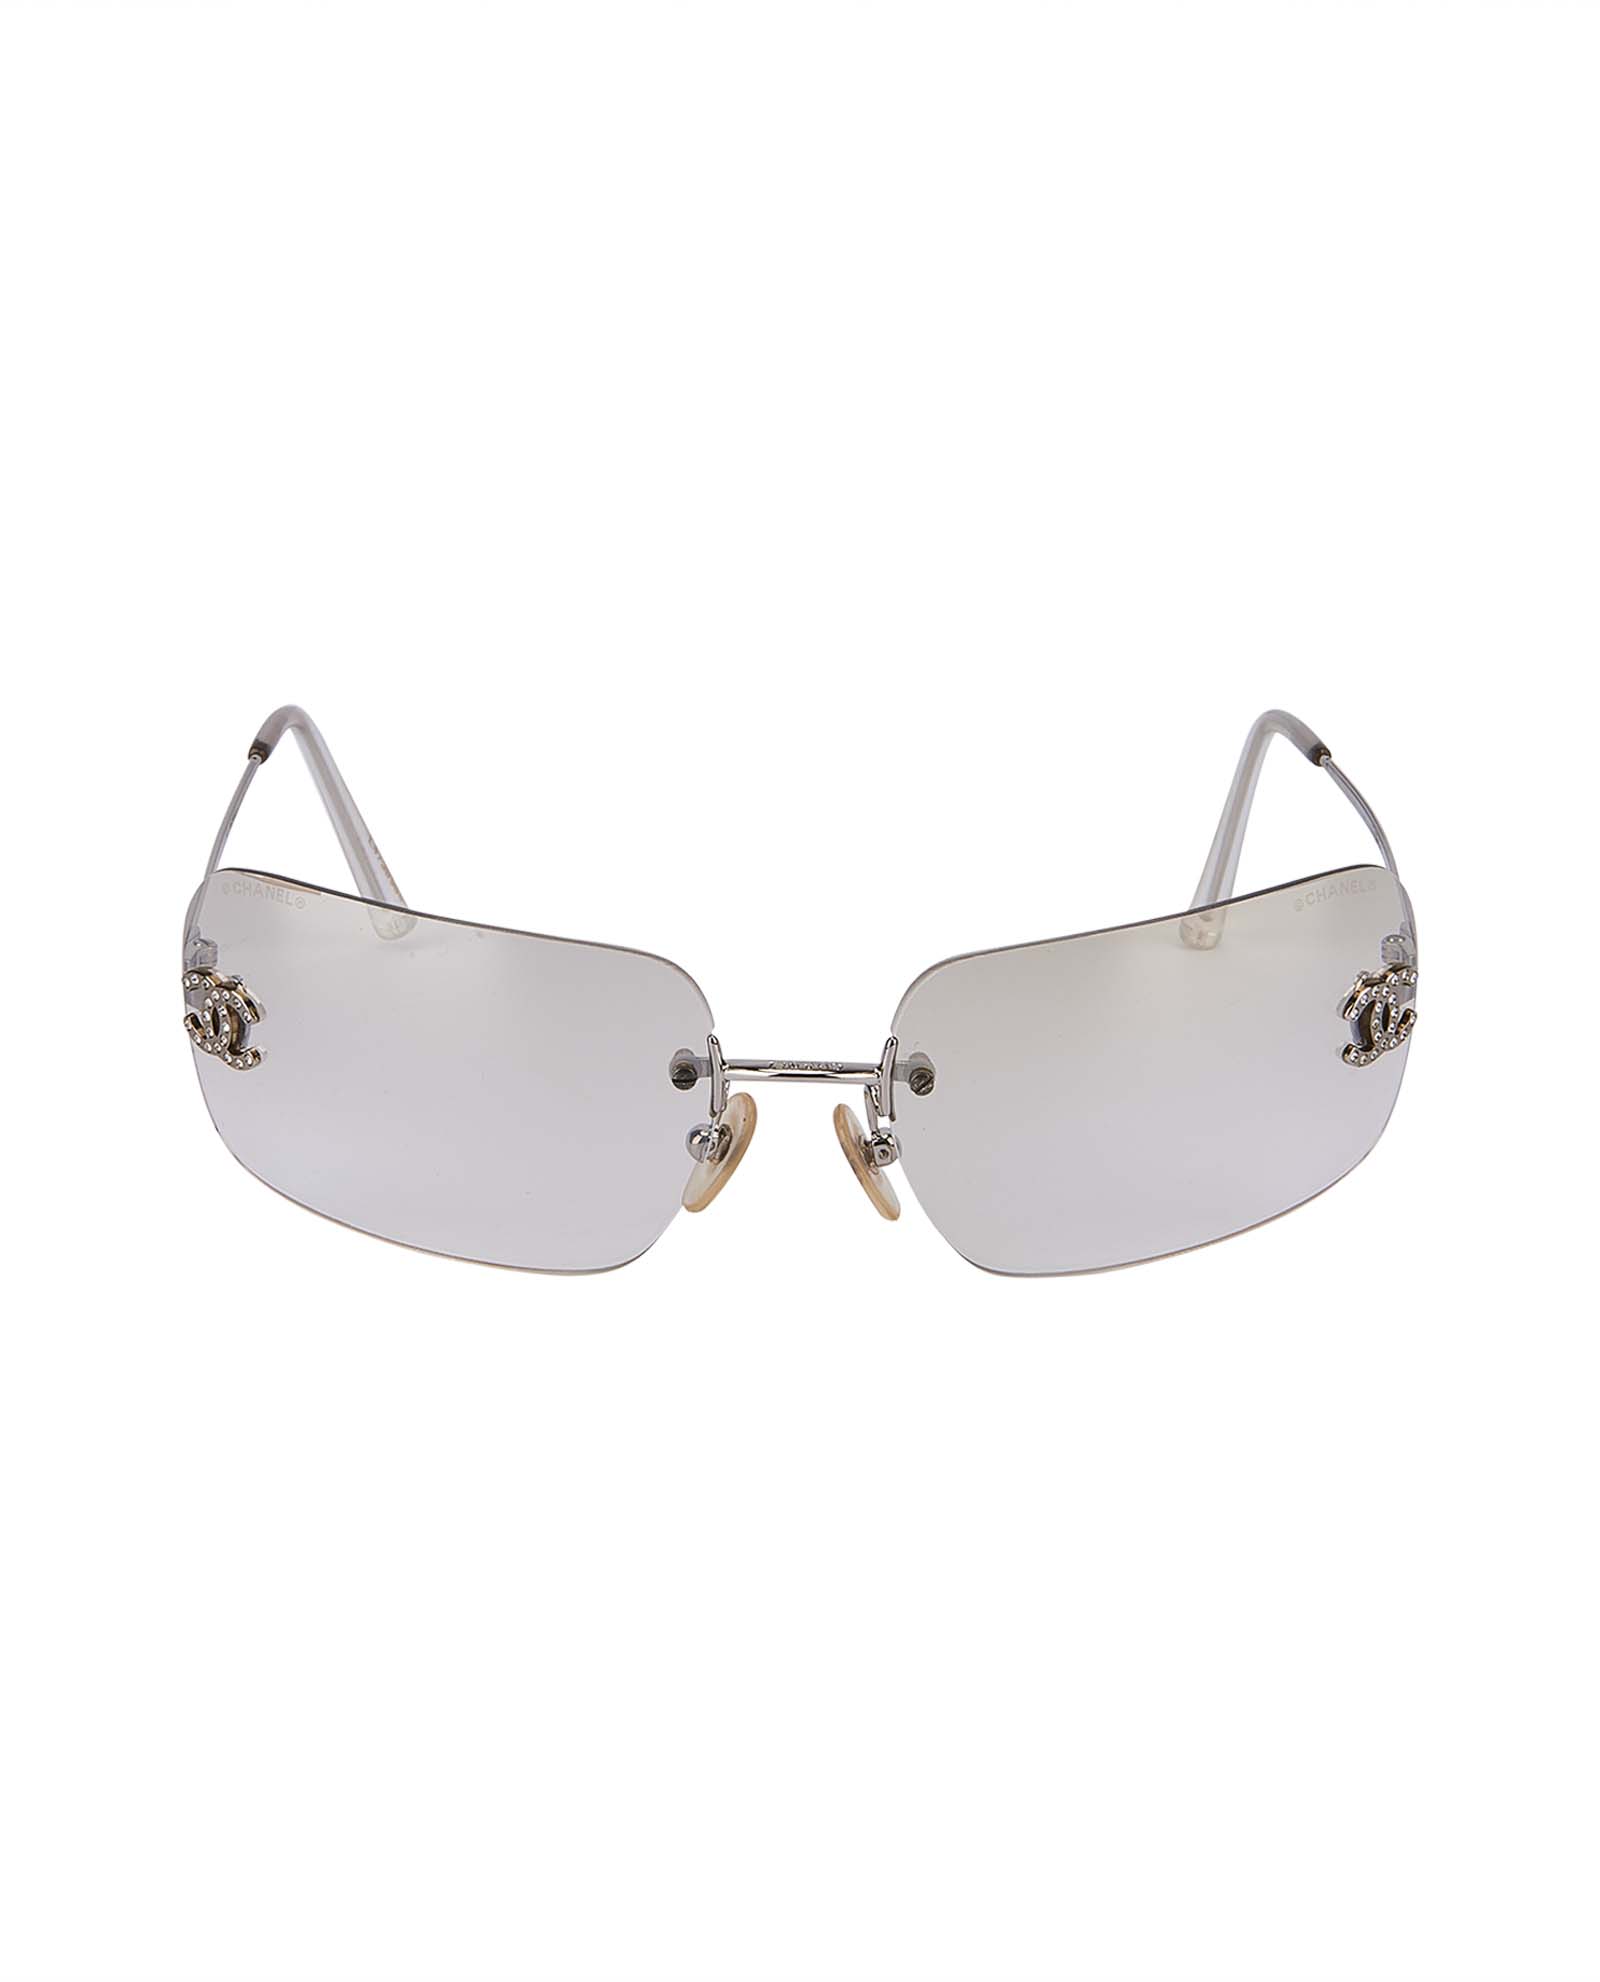 Chanel Rimless Clear Lens Glasses